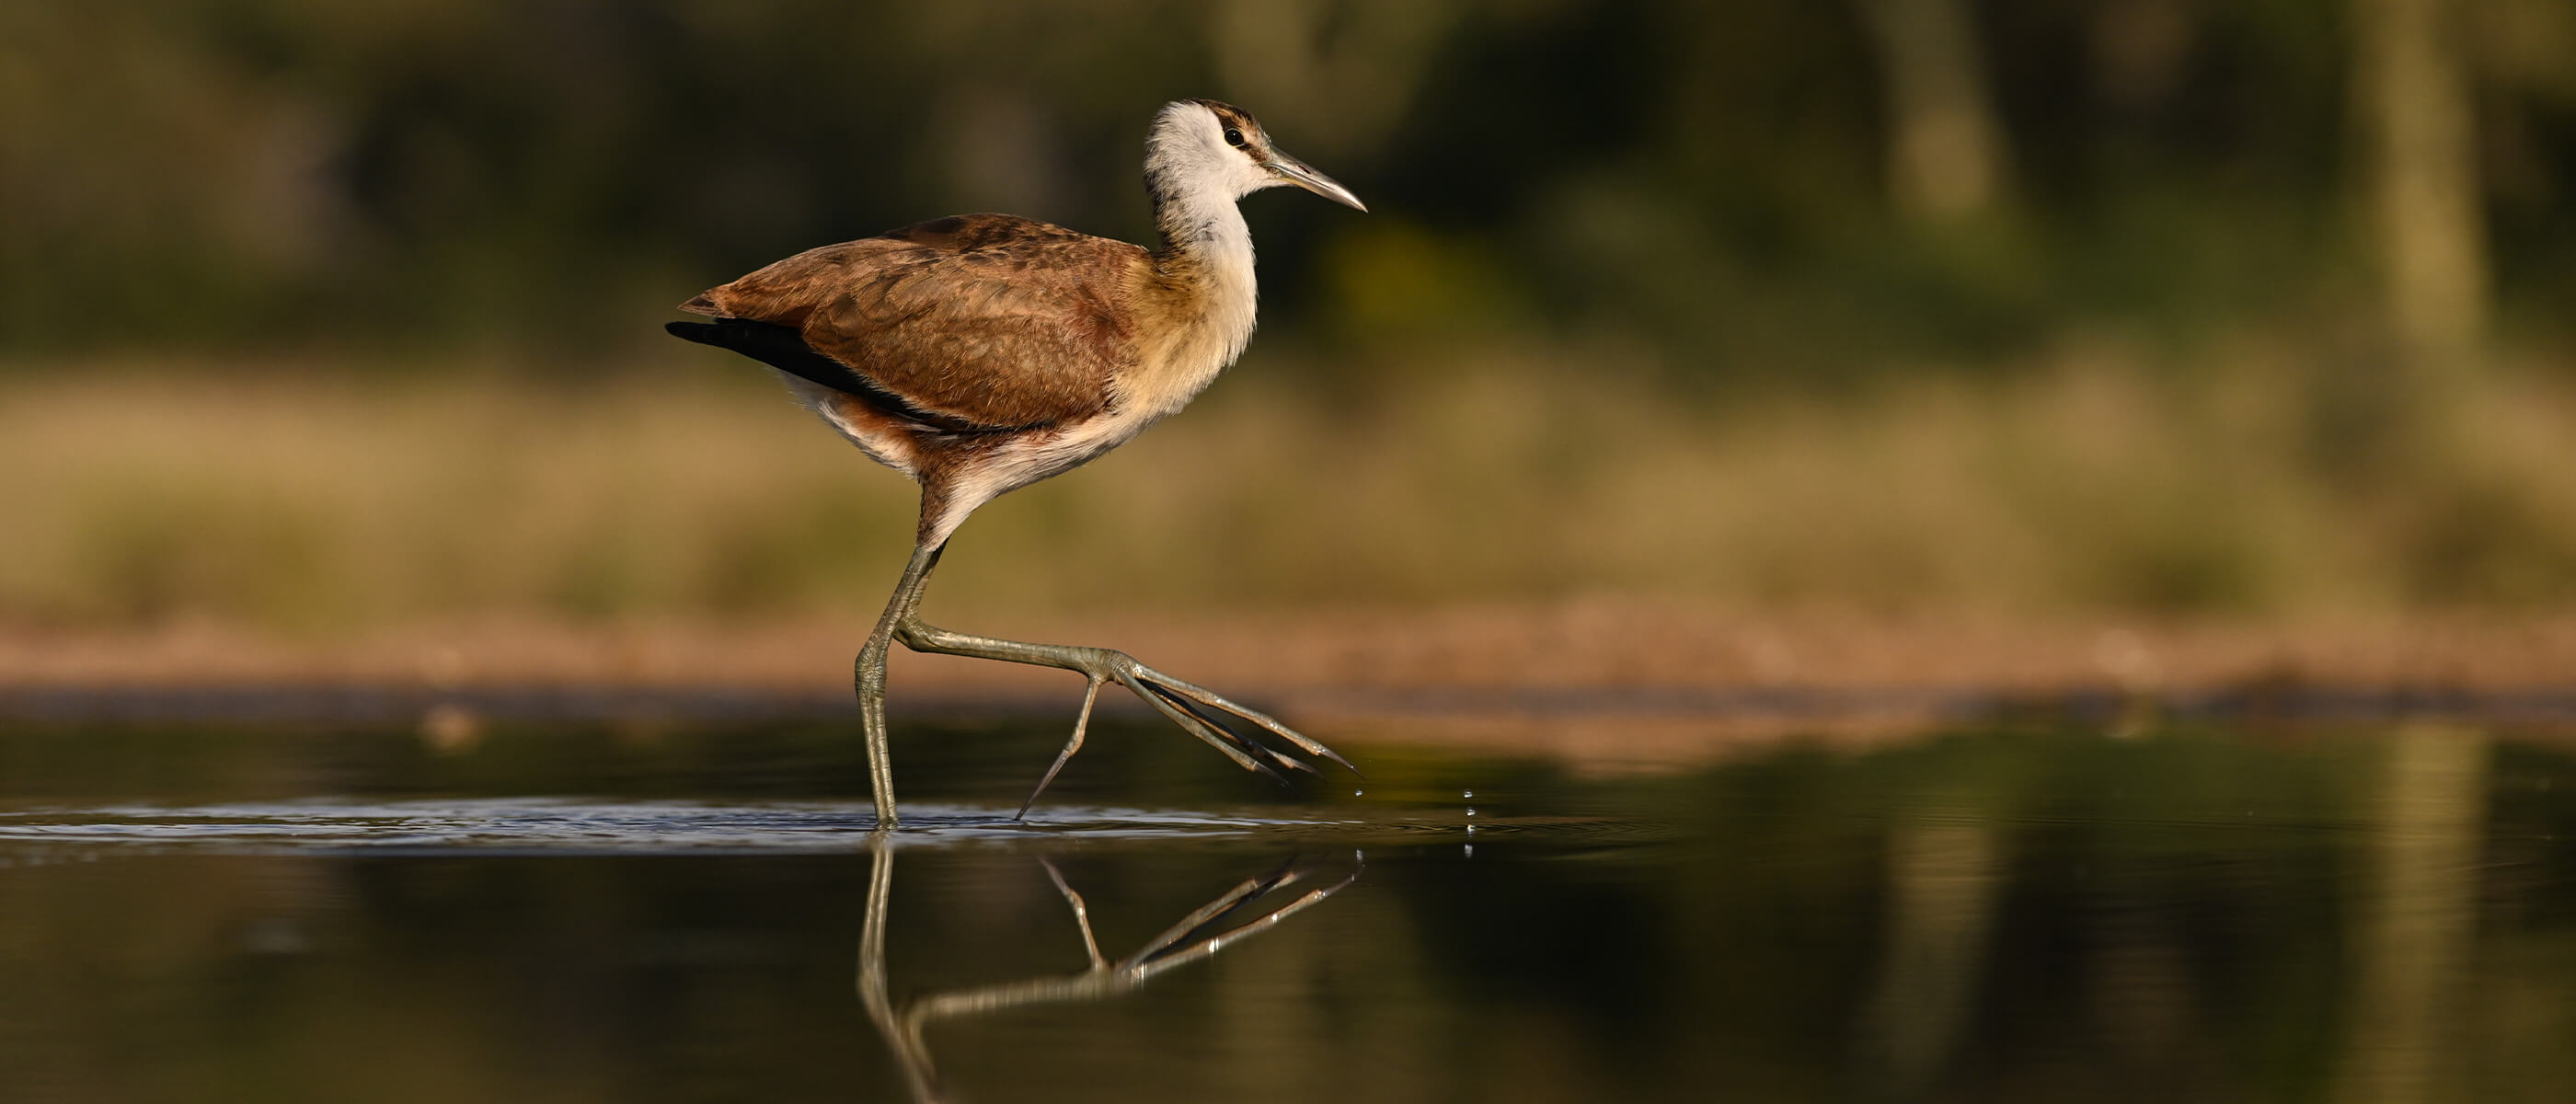 photo of a bird taking a big step with its large foot out of water